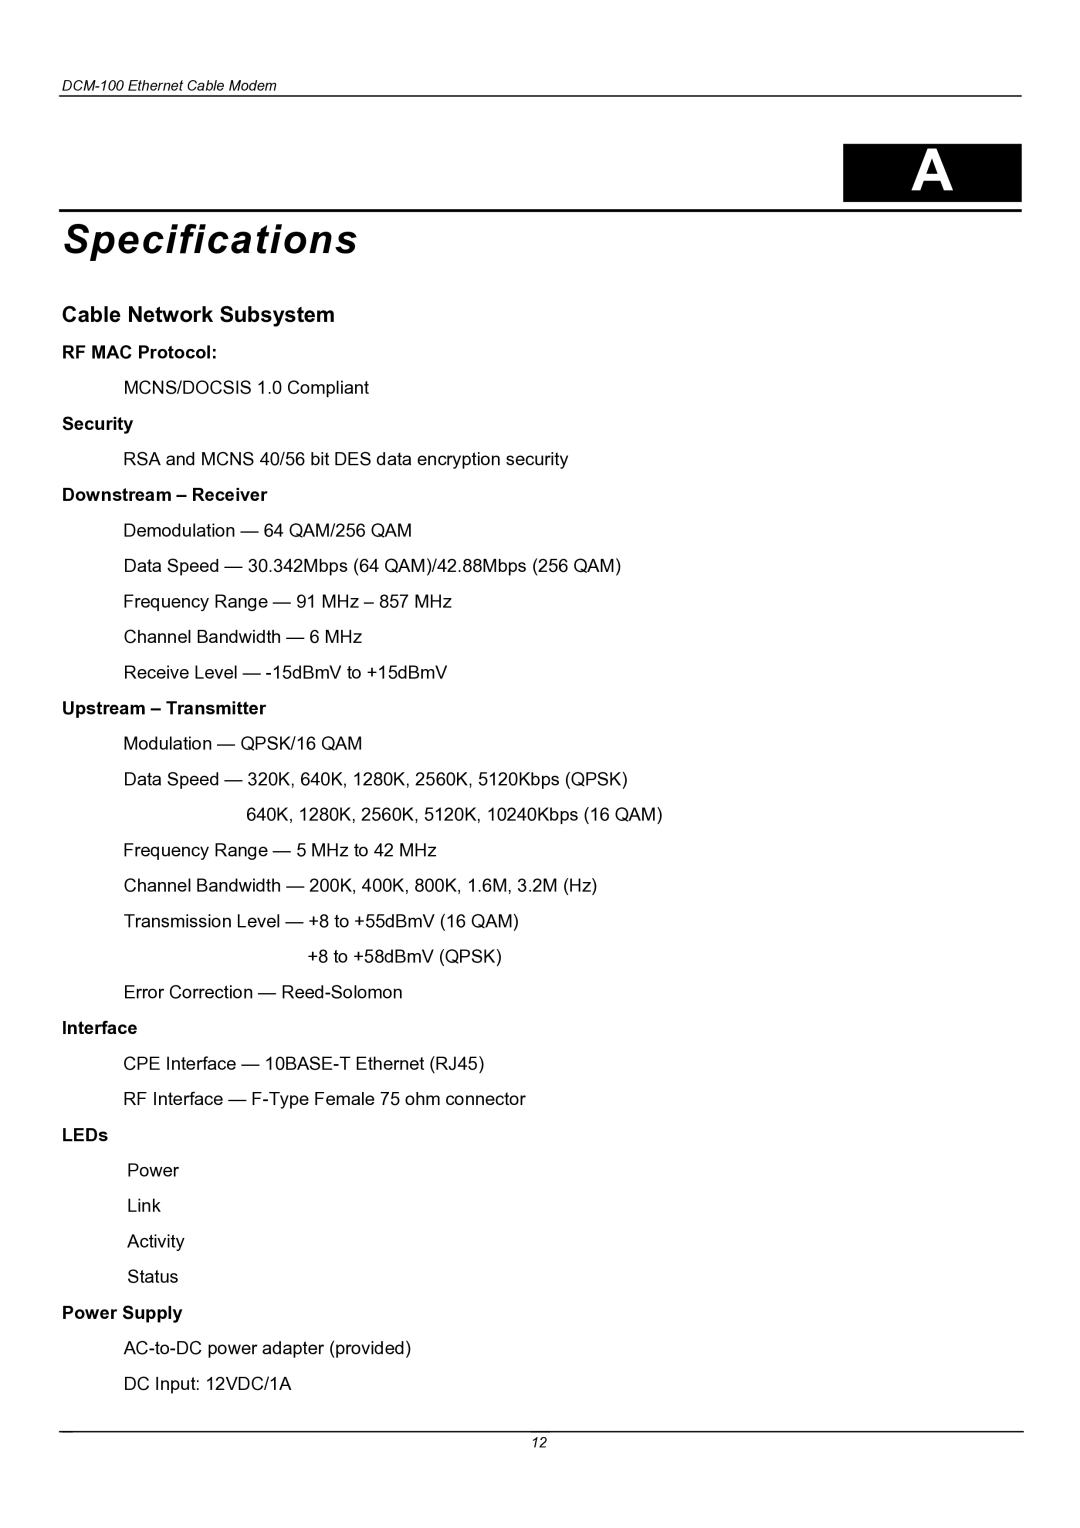 D-Link DCM-100 user manual Specifications, Cable Network Subsystem 